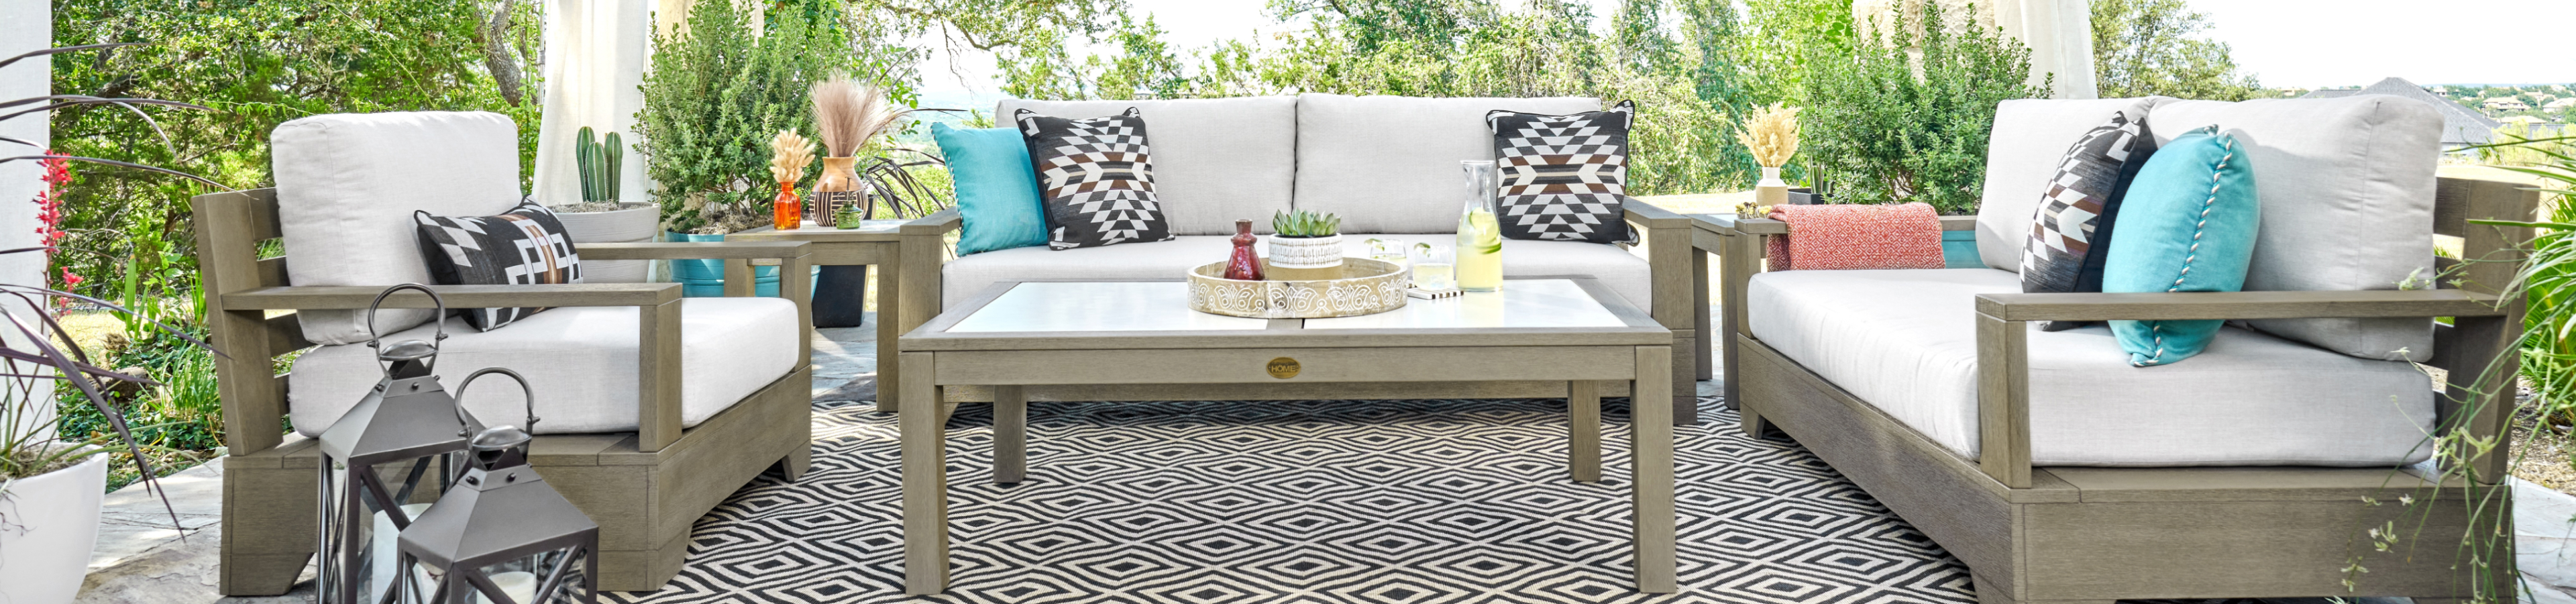 Outdoor patio set with white cushions, colorful pillows, and a patterned rug